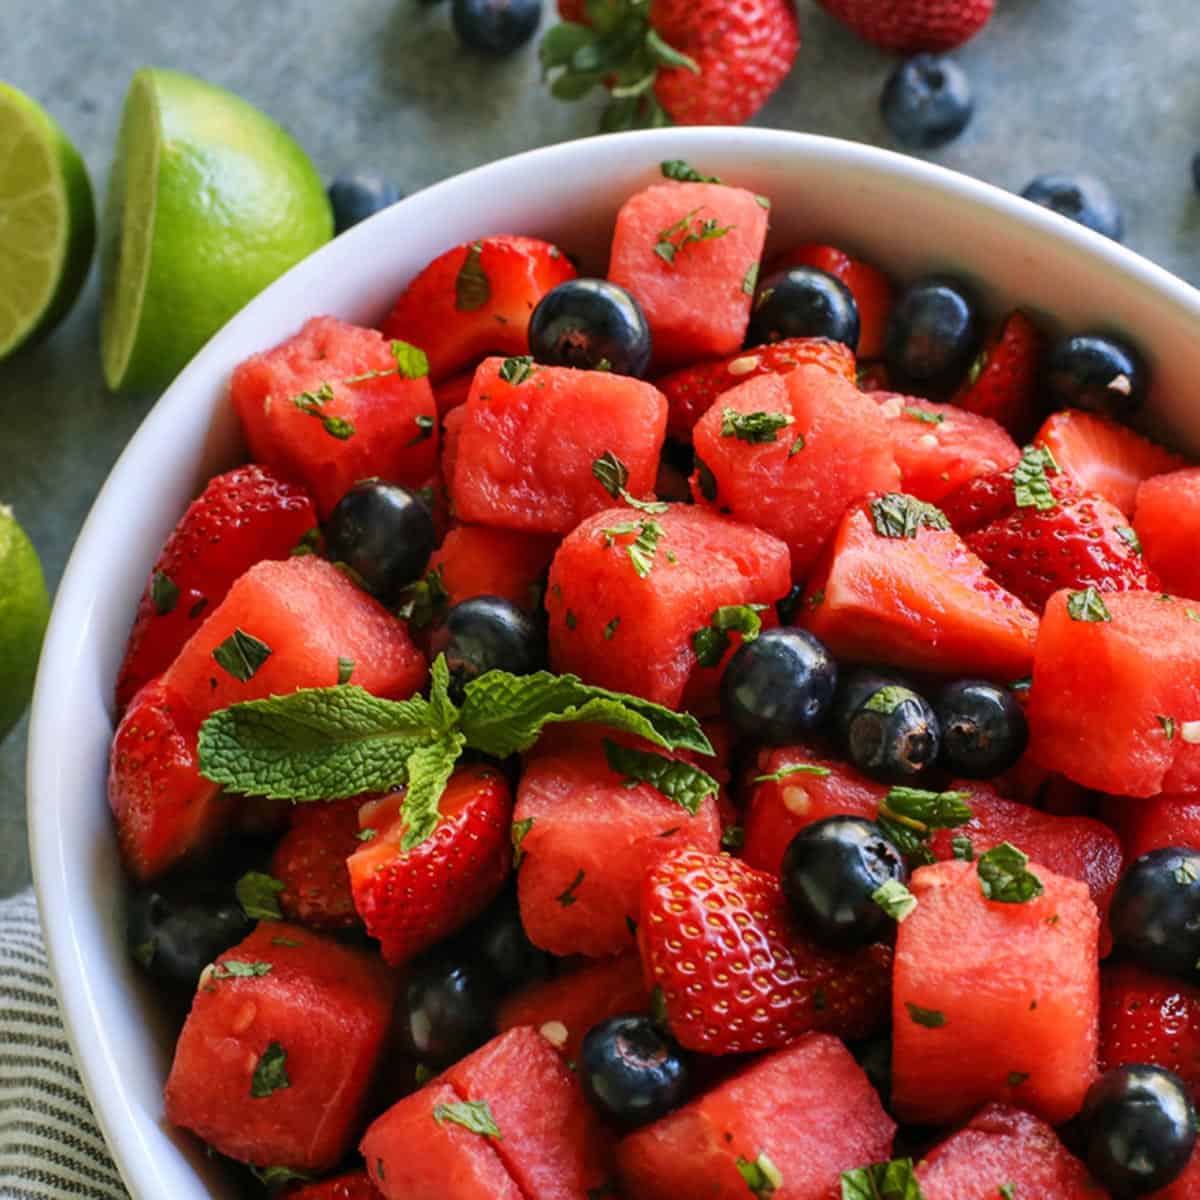 watermelon, strawberries, blueberries in a bowl